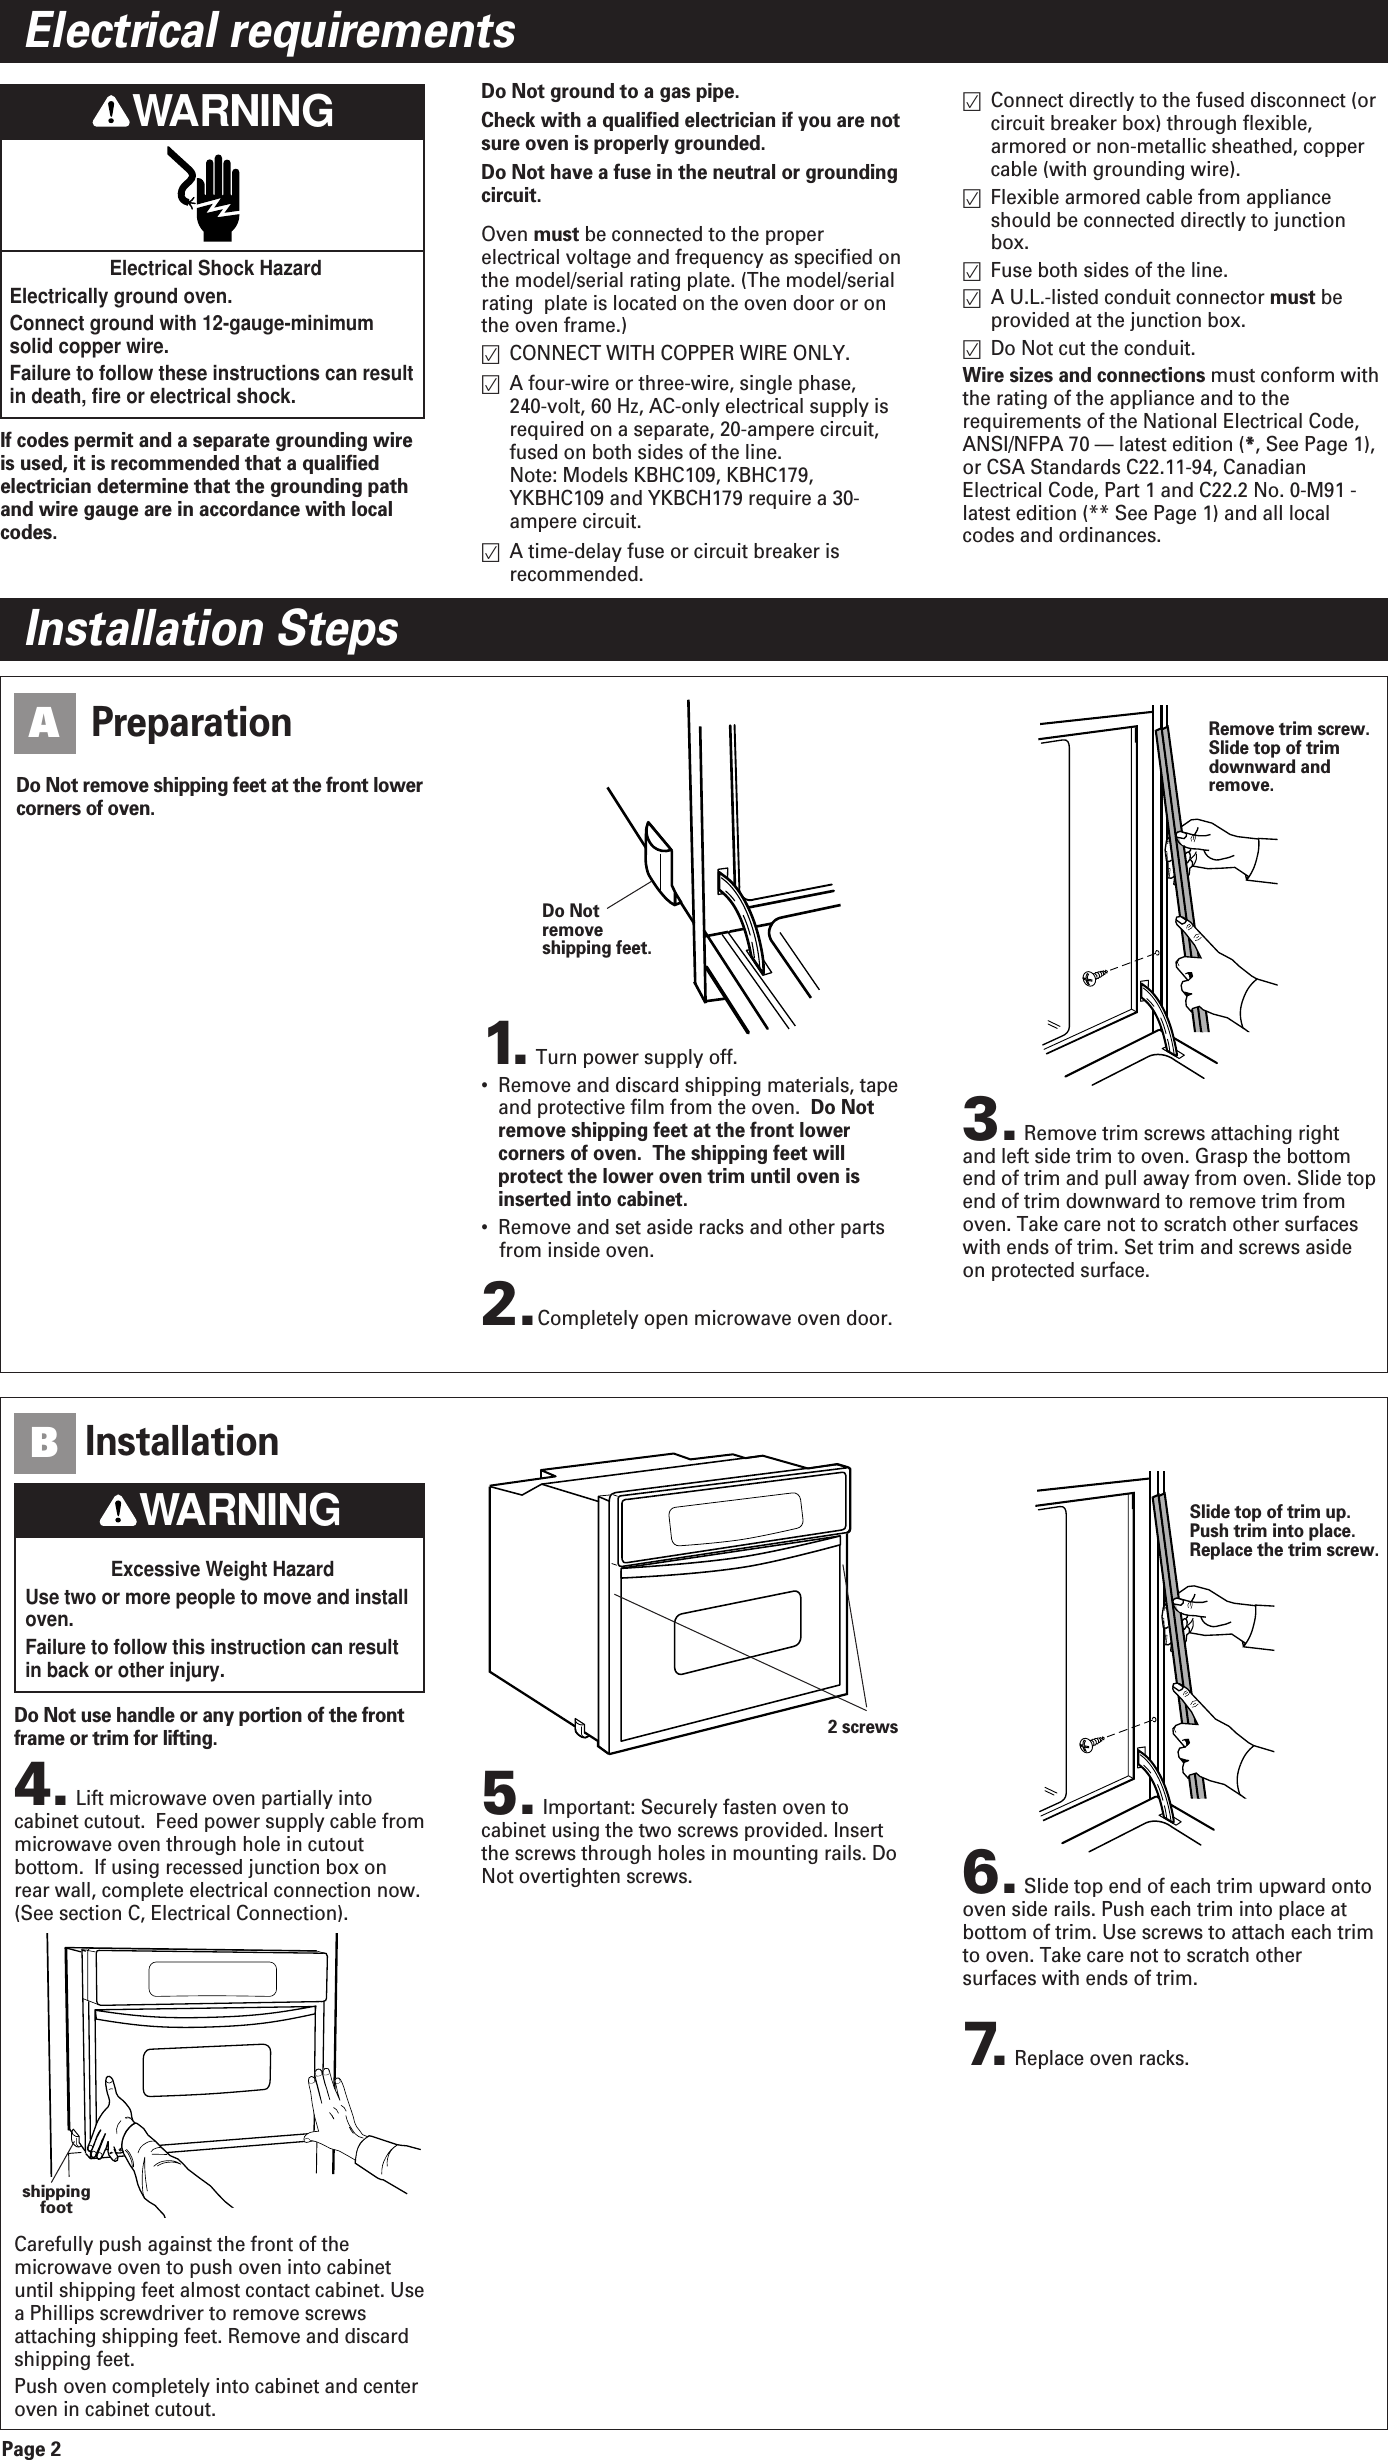 Page 2Electrical requirementsInstallation Steps2.Completely open microwave oven door.PreparationA3.Remove trim screws attaching rightand left side trim to oven. Grasp the bottomend of trim and pull away from oven. Slide topend of trim downward to remove trim fromoven. Take care not to scratch other surfaceswith ends of trim. Set trim and screws asideon protected surface.Remove trim screw.Slide top of trimdownward andremove.1. Turn power supply off. •  Remove and discard shipping materials, tapeand protective film from the oven. Do Notremove shipping feet at the front lowercorners of oven.  The shipping feet willprotect the lower oven trim until oven isinserted into cabinet. •  Remove and set aside racks and other partsfrom inside oven.Do Notremoveshipping feet.Electrical Shock HazardElectrically ground oven.Connect ground with 12-gauge-minimumsolid copper wire.Failure to follow these instructions can resultin death, fire or electrical shock.If codes permit and a separate grounding wireis used, it is recommended that a qualifiedelectrician determine that the grounding pathand wire gauge are in accordance with localcodes.Do Not ground to a gas pipe.Check with a qualified electrician if you are notsure oven is properly grounded.Do Not have a fuse in the neutral or groundingcircuit.Oven must be connected to the properelectrical voltage and frequency as specified onthe model/serial rating plate. (The model/serialrating  plate is located on the oven door or onthe oven frame.)CONNECT WITH COPPER WIRE ONLY.A four-wire or three-wire, single phase, 240-volt, 60 Hz, AC-only electrical supply isrequired on a separate, 20-ampere circuit,fused on both sides of the line.Note: Models KBHC109, KBHC179,YKBHC109 and YKBCH179 require a 30-ampere circuit.A time-delay fuse or circuit breaker isrecommended.Connect directly to the fused disconnect (orcircuit breaker box) through flexible,armored or non-metallic sheathed, coppercable (with grounding wire). Flexible armored cable from applianceshould be connected directly to junctionbox.Fuse both sides of the line. A U.L.-listed conduit connector must beprovided at the junction box.Do Not cut the conduit.Wire sizes and connections must conform withthe rating of the appliance and to therequirements of the National Electrical Code,ANSI/NFPA 70 — latest edition (*, See Page 1),or CSA Standards C22.11-94, CanadianElectrical Code, Part 1 and C22.2 No. 0-M91 -latest edition (** See Page 1) and all localcodes and ordinances.Excessive Weight HazardUse two or more people to move and installoven.Failure to follow this instruction can resultin back or other injury.Do Not remove shipping feet at the front lowercorners of oven.4.Lift microwave oven partially intocabinet cutout.  Feed power supply cable frommicrowave oven through hole in cutoutbottom.  If using recessed junction box onrear wall, complete electrical connection now.(See section C, Electrical Connection).Carefully push against the front of themicrowave oven to push oven into cabinetuntil shipping feet almost contact cabinet. Usea Phillips screwdriver to remove screwsattaching shipping feet. Remove and discardshipping feet.Push oven completely into cabinet and centeroven in cabinet cutout.7. Replace oven racks. InstallationB5.Important: Securely fasten oven tocabinet using the two screws provided. Insertthe screws through holes in mounting rails. DoNot overtighten screws. 6.Slide top end of each trim upward ontooven side rails. Push each trim into place atbottom of trim. Use screws to attach each trimto oven. Take care not to scratch othersurfaces with ends of trim.2 screwsshippingfootSlide top of trim up.Push trim into place.Replace the trim screw.Do Not use handle or any portion of the frontframe or trim for lifting.WARNINGWARNING